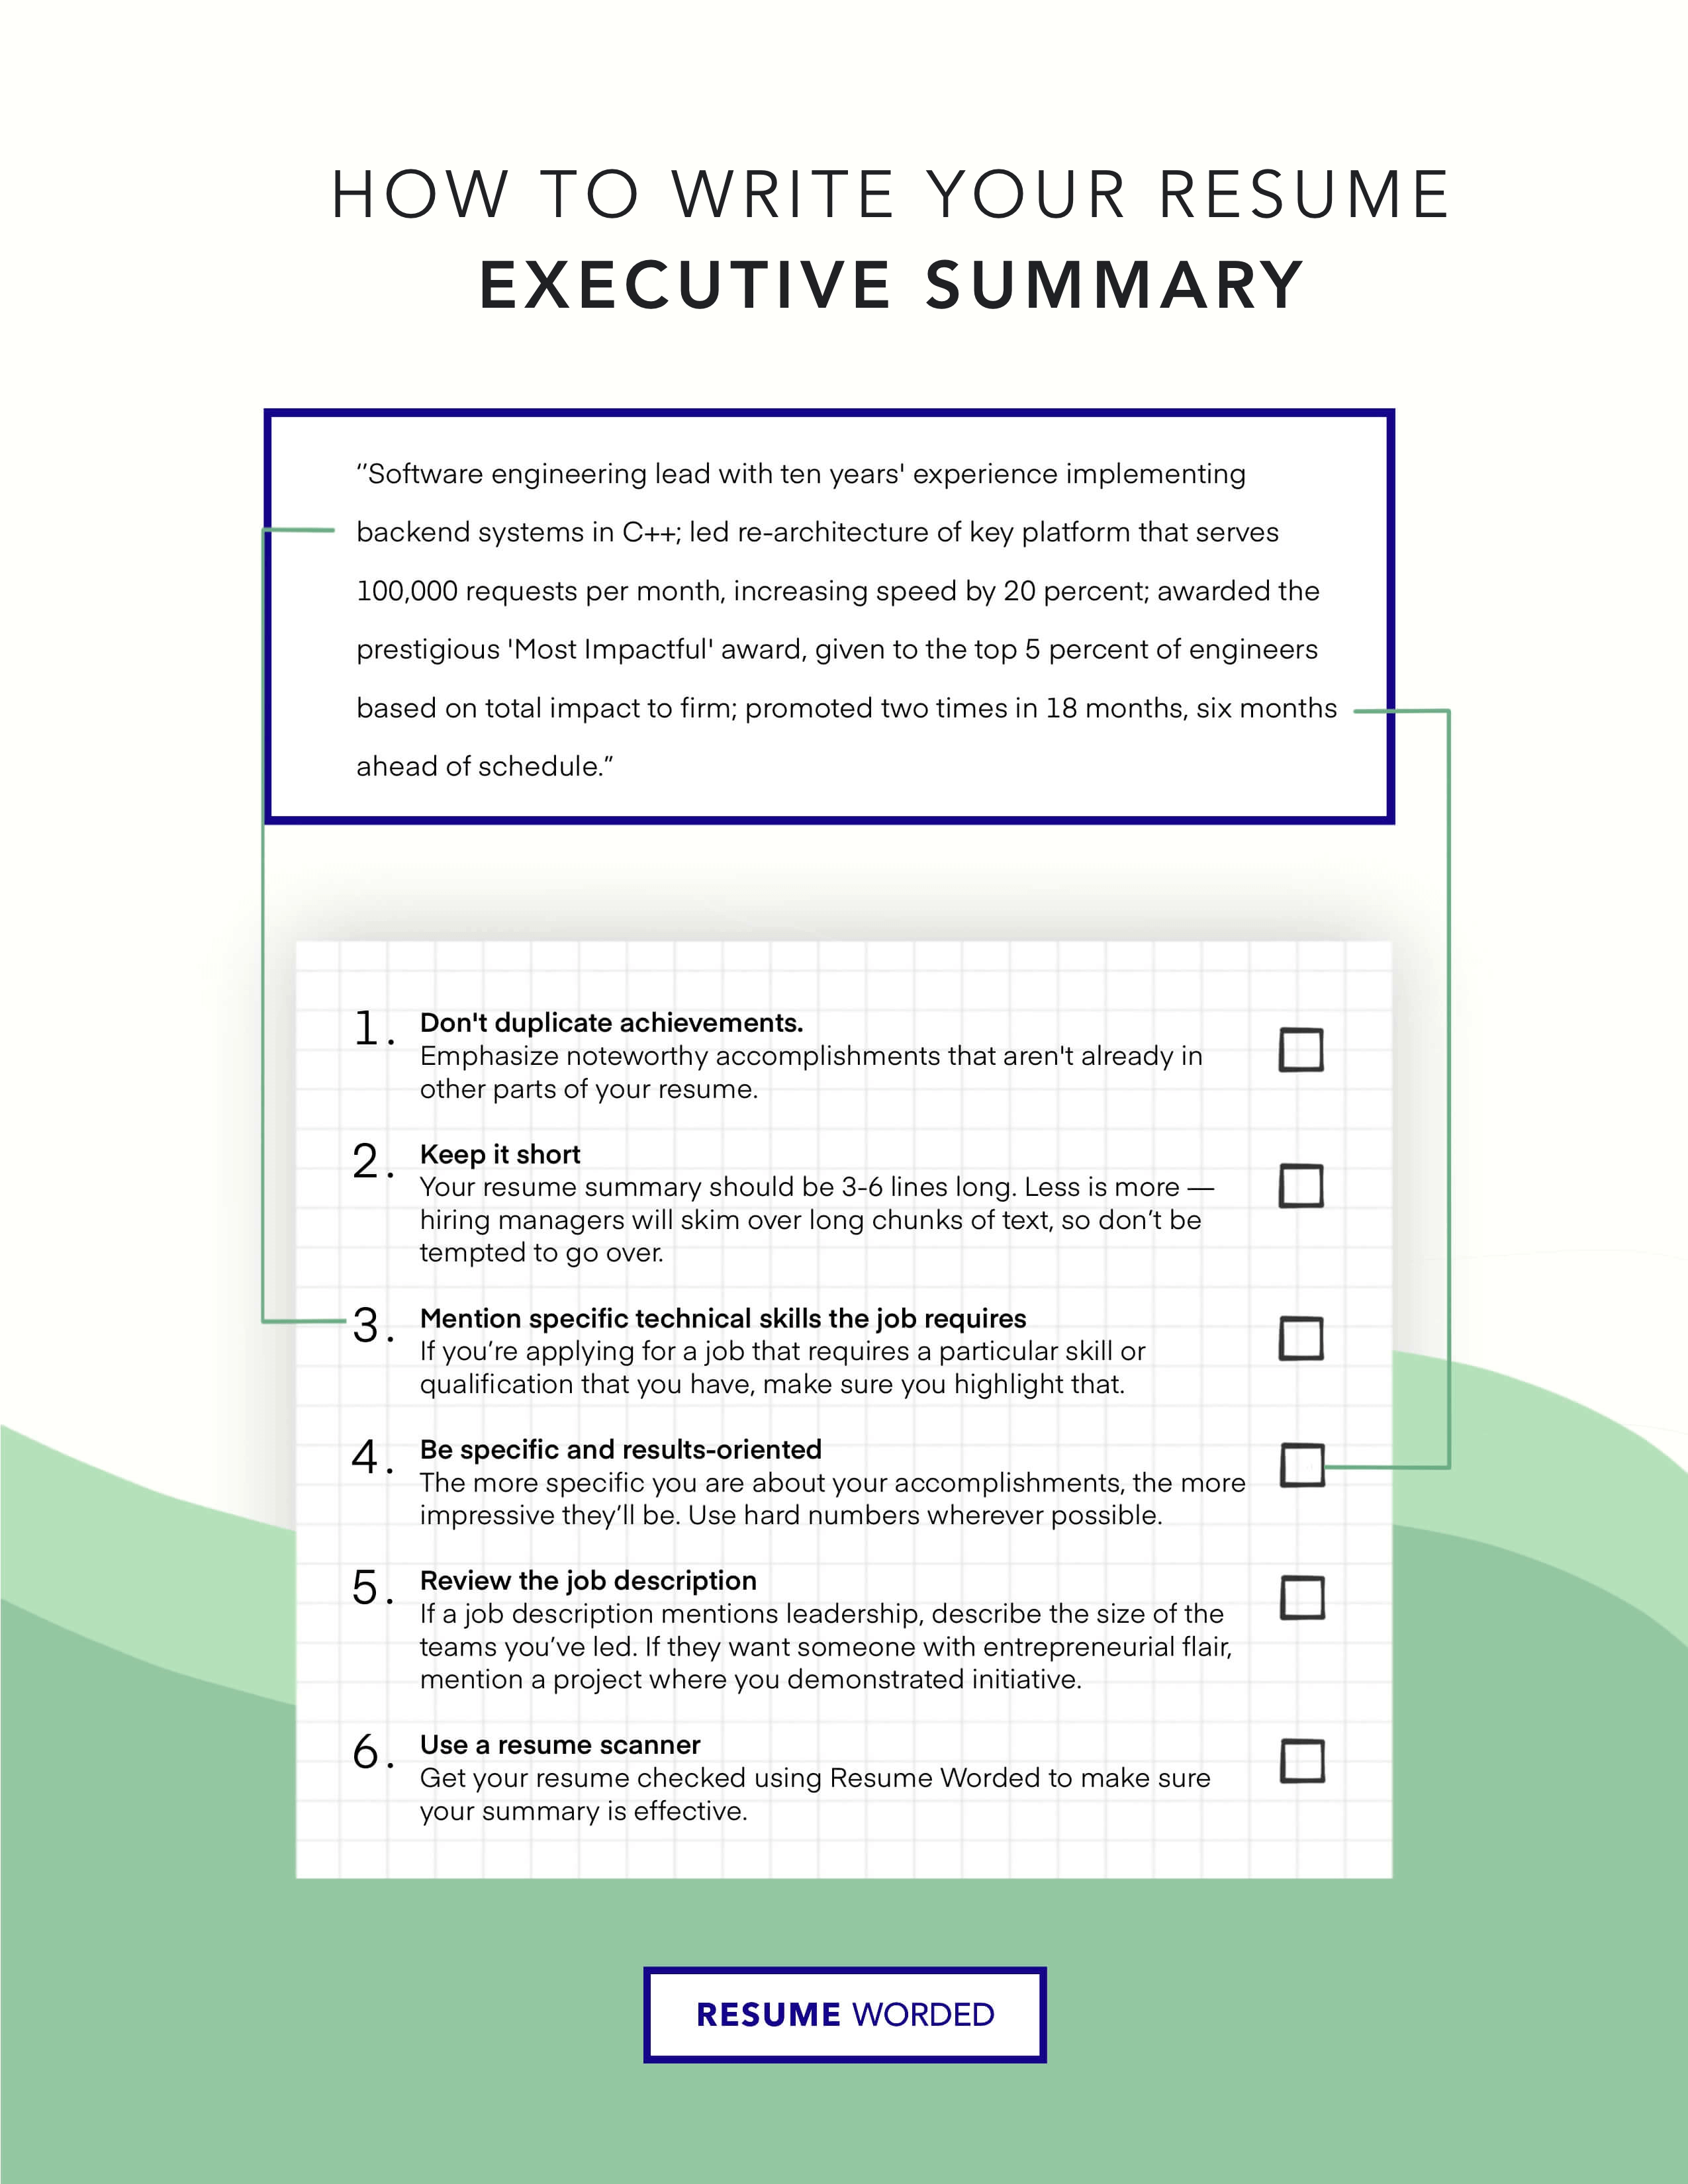 what does summary of qualifications mean on a resume